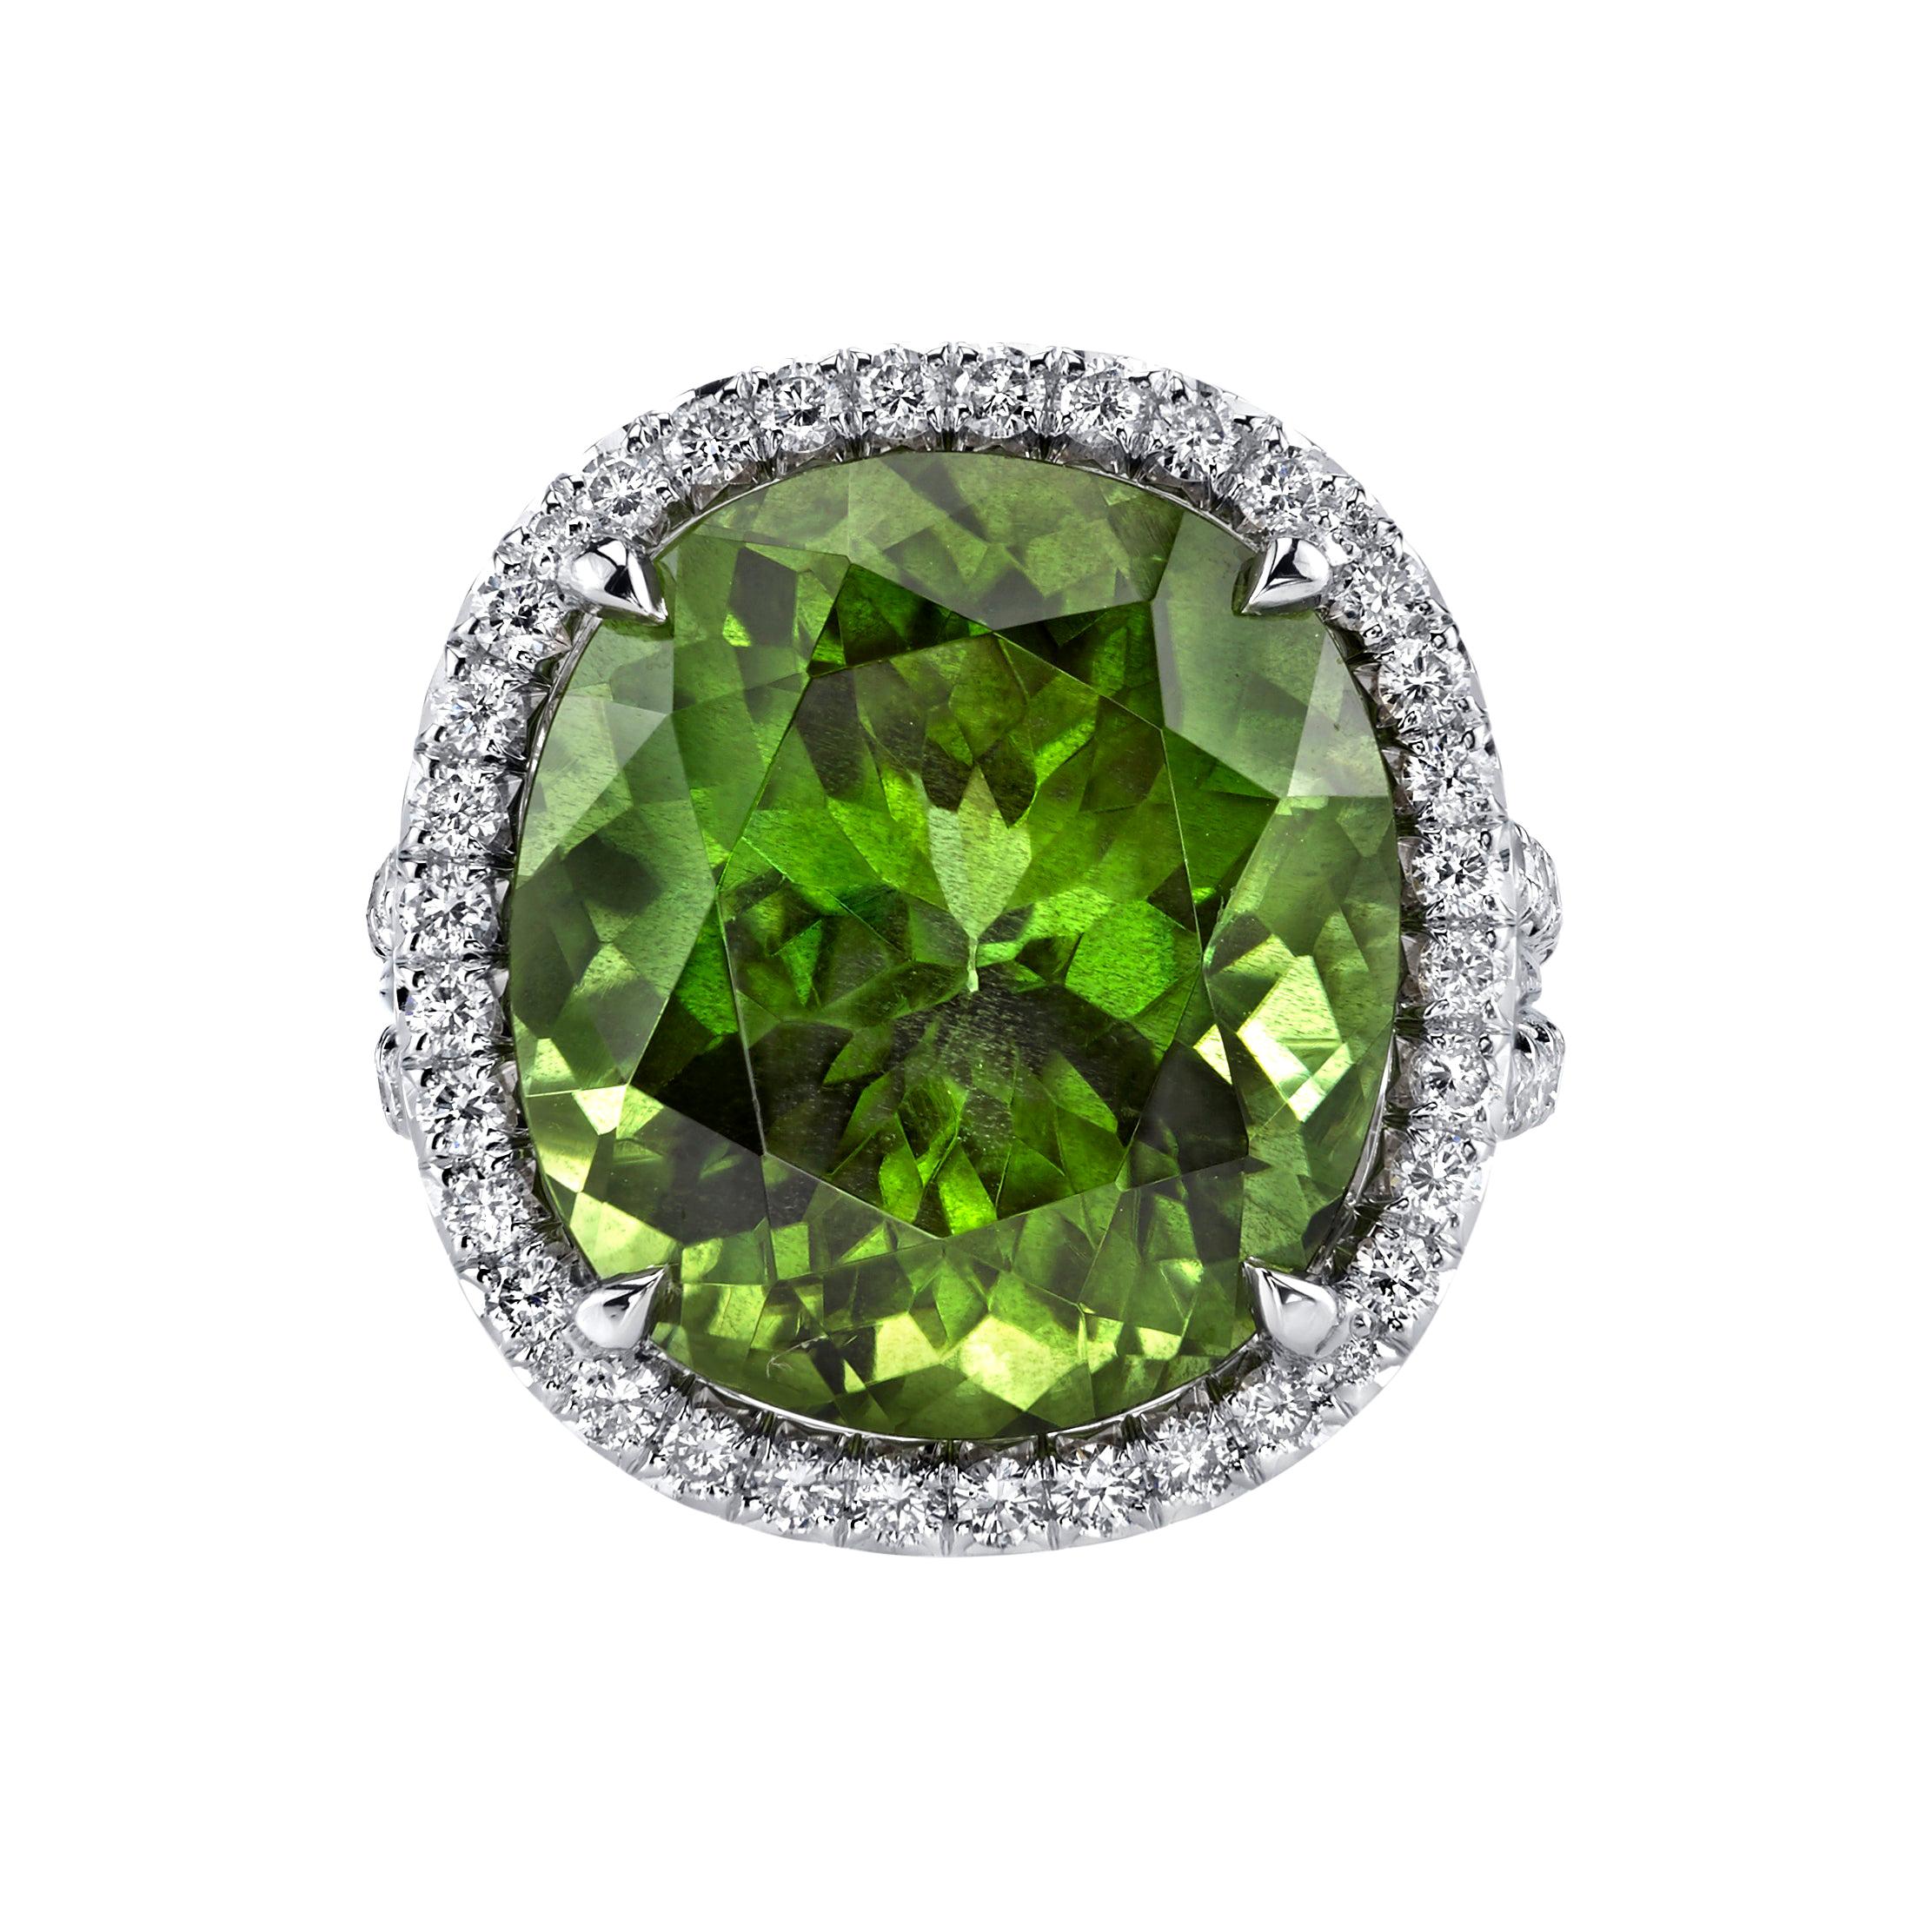 16.16ct Burmese Peridot Ring Adorned with 1.15ct Diamonds and Set in 18 KW